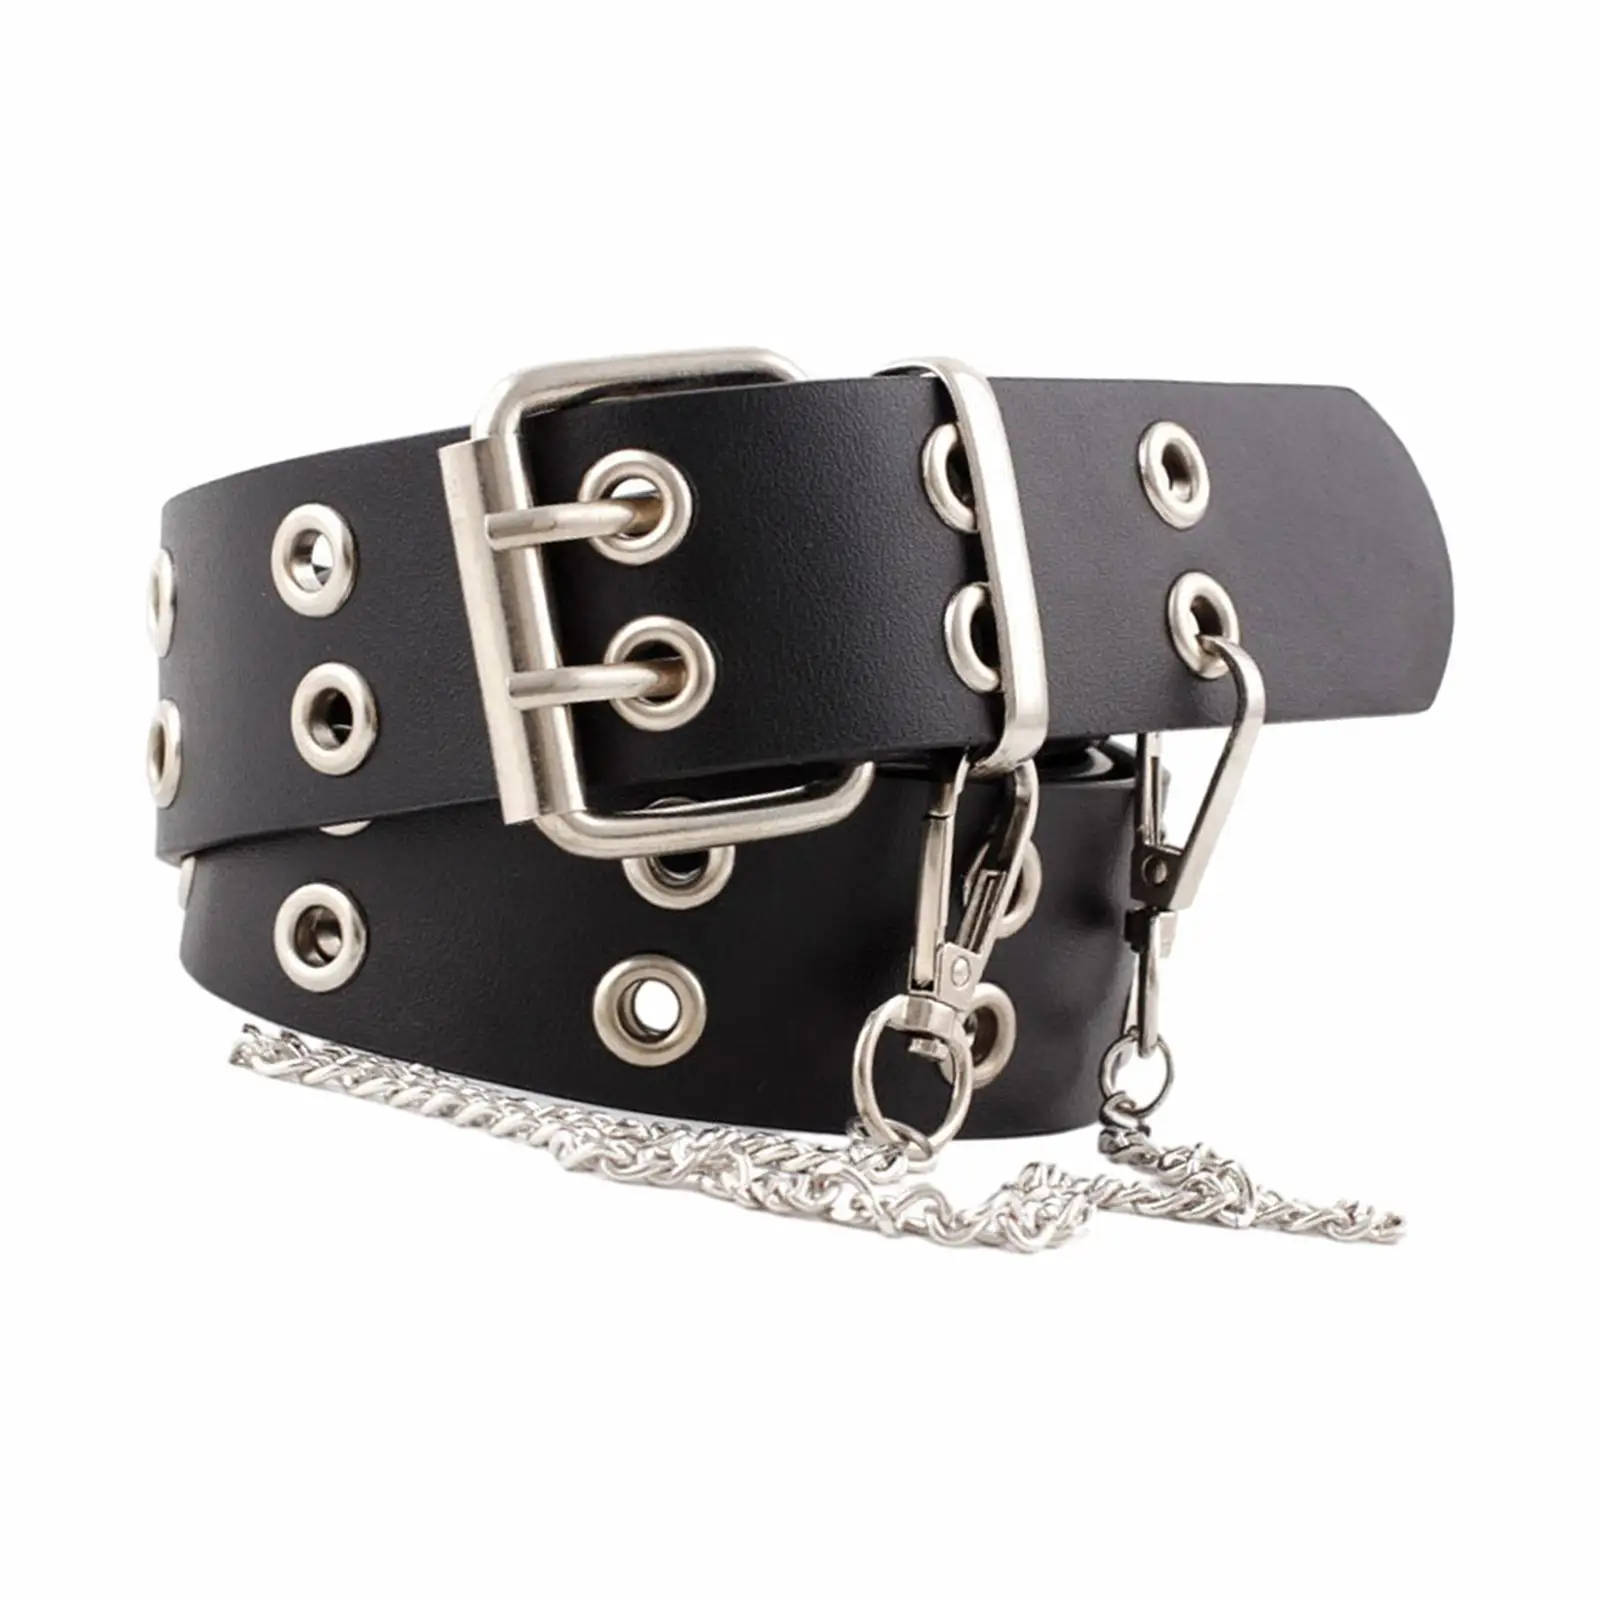 Double Grommet Belt with 2 Holes Rock Punk Adjustable PU Leather Eyelet with Chain Waistband for Club Jeans Cosplay Party Women